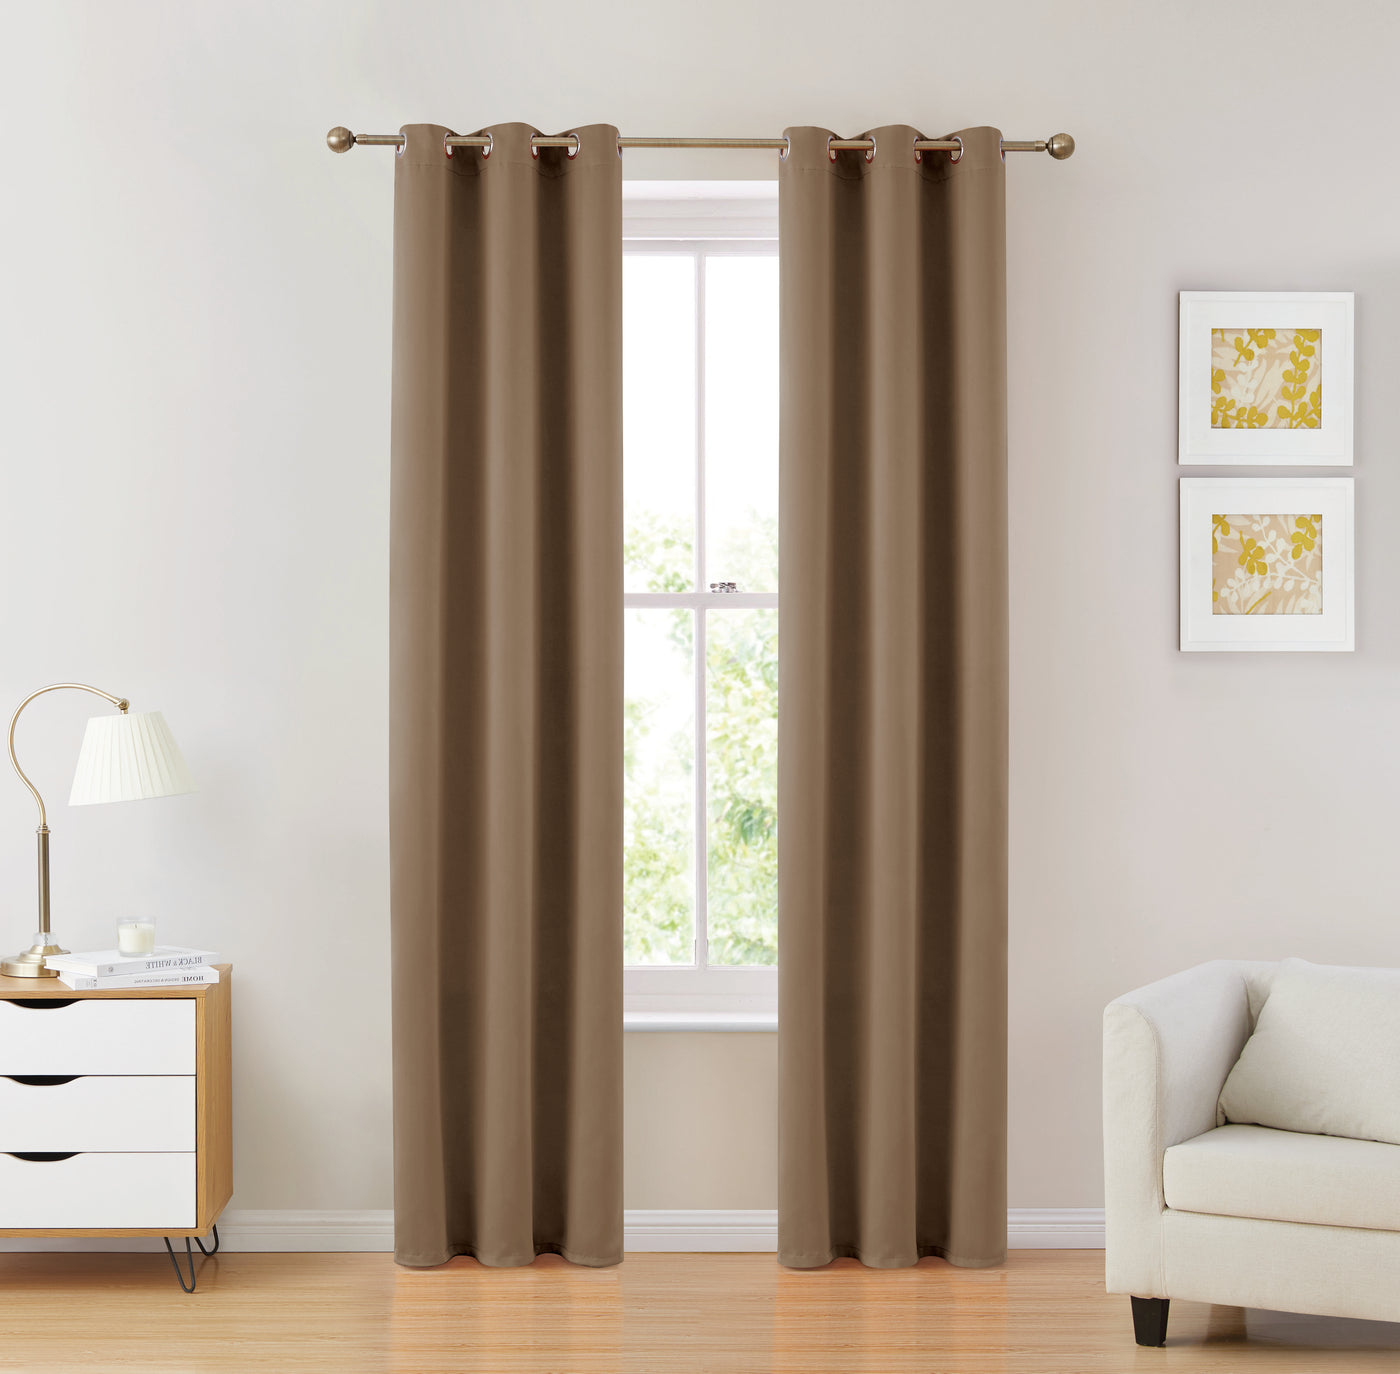 SOLID BLACKOUT WITH 6 GROMMETS CURTAIN